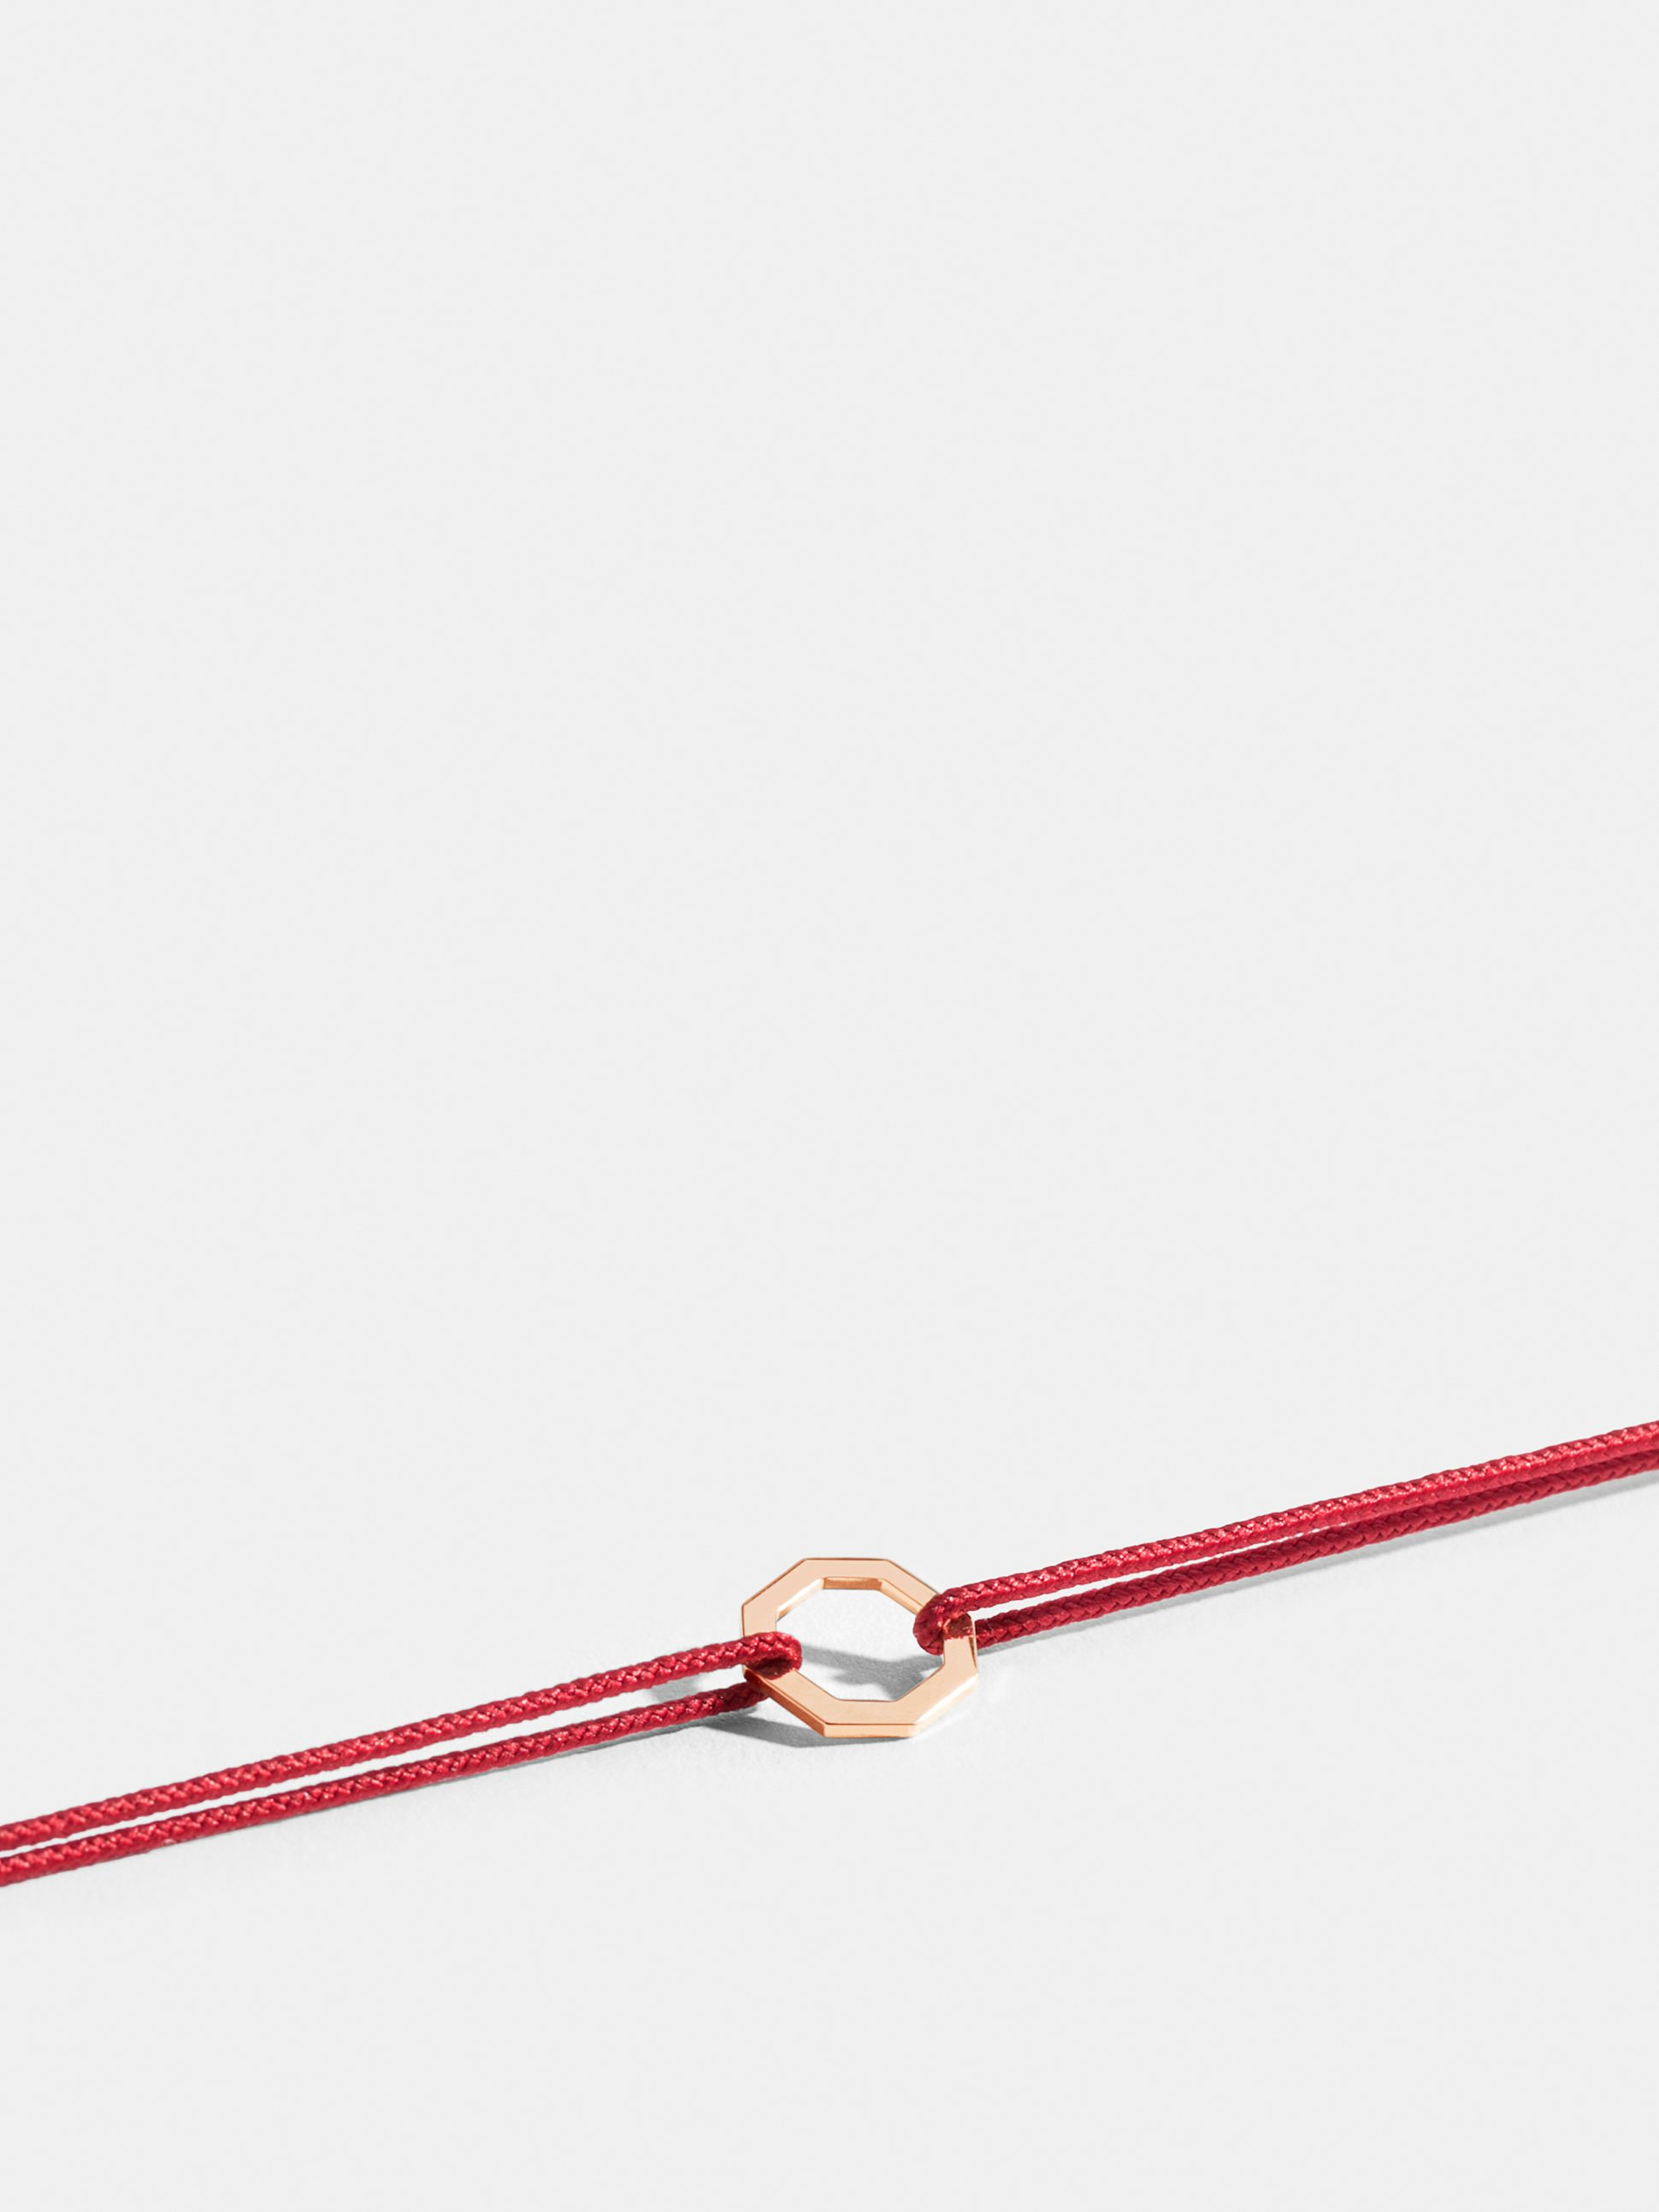 Octogone motif in 18k Fairmined ethical rose gold, on a carmine red cord. 